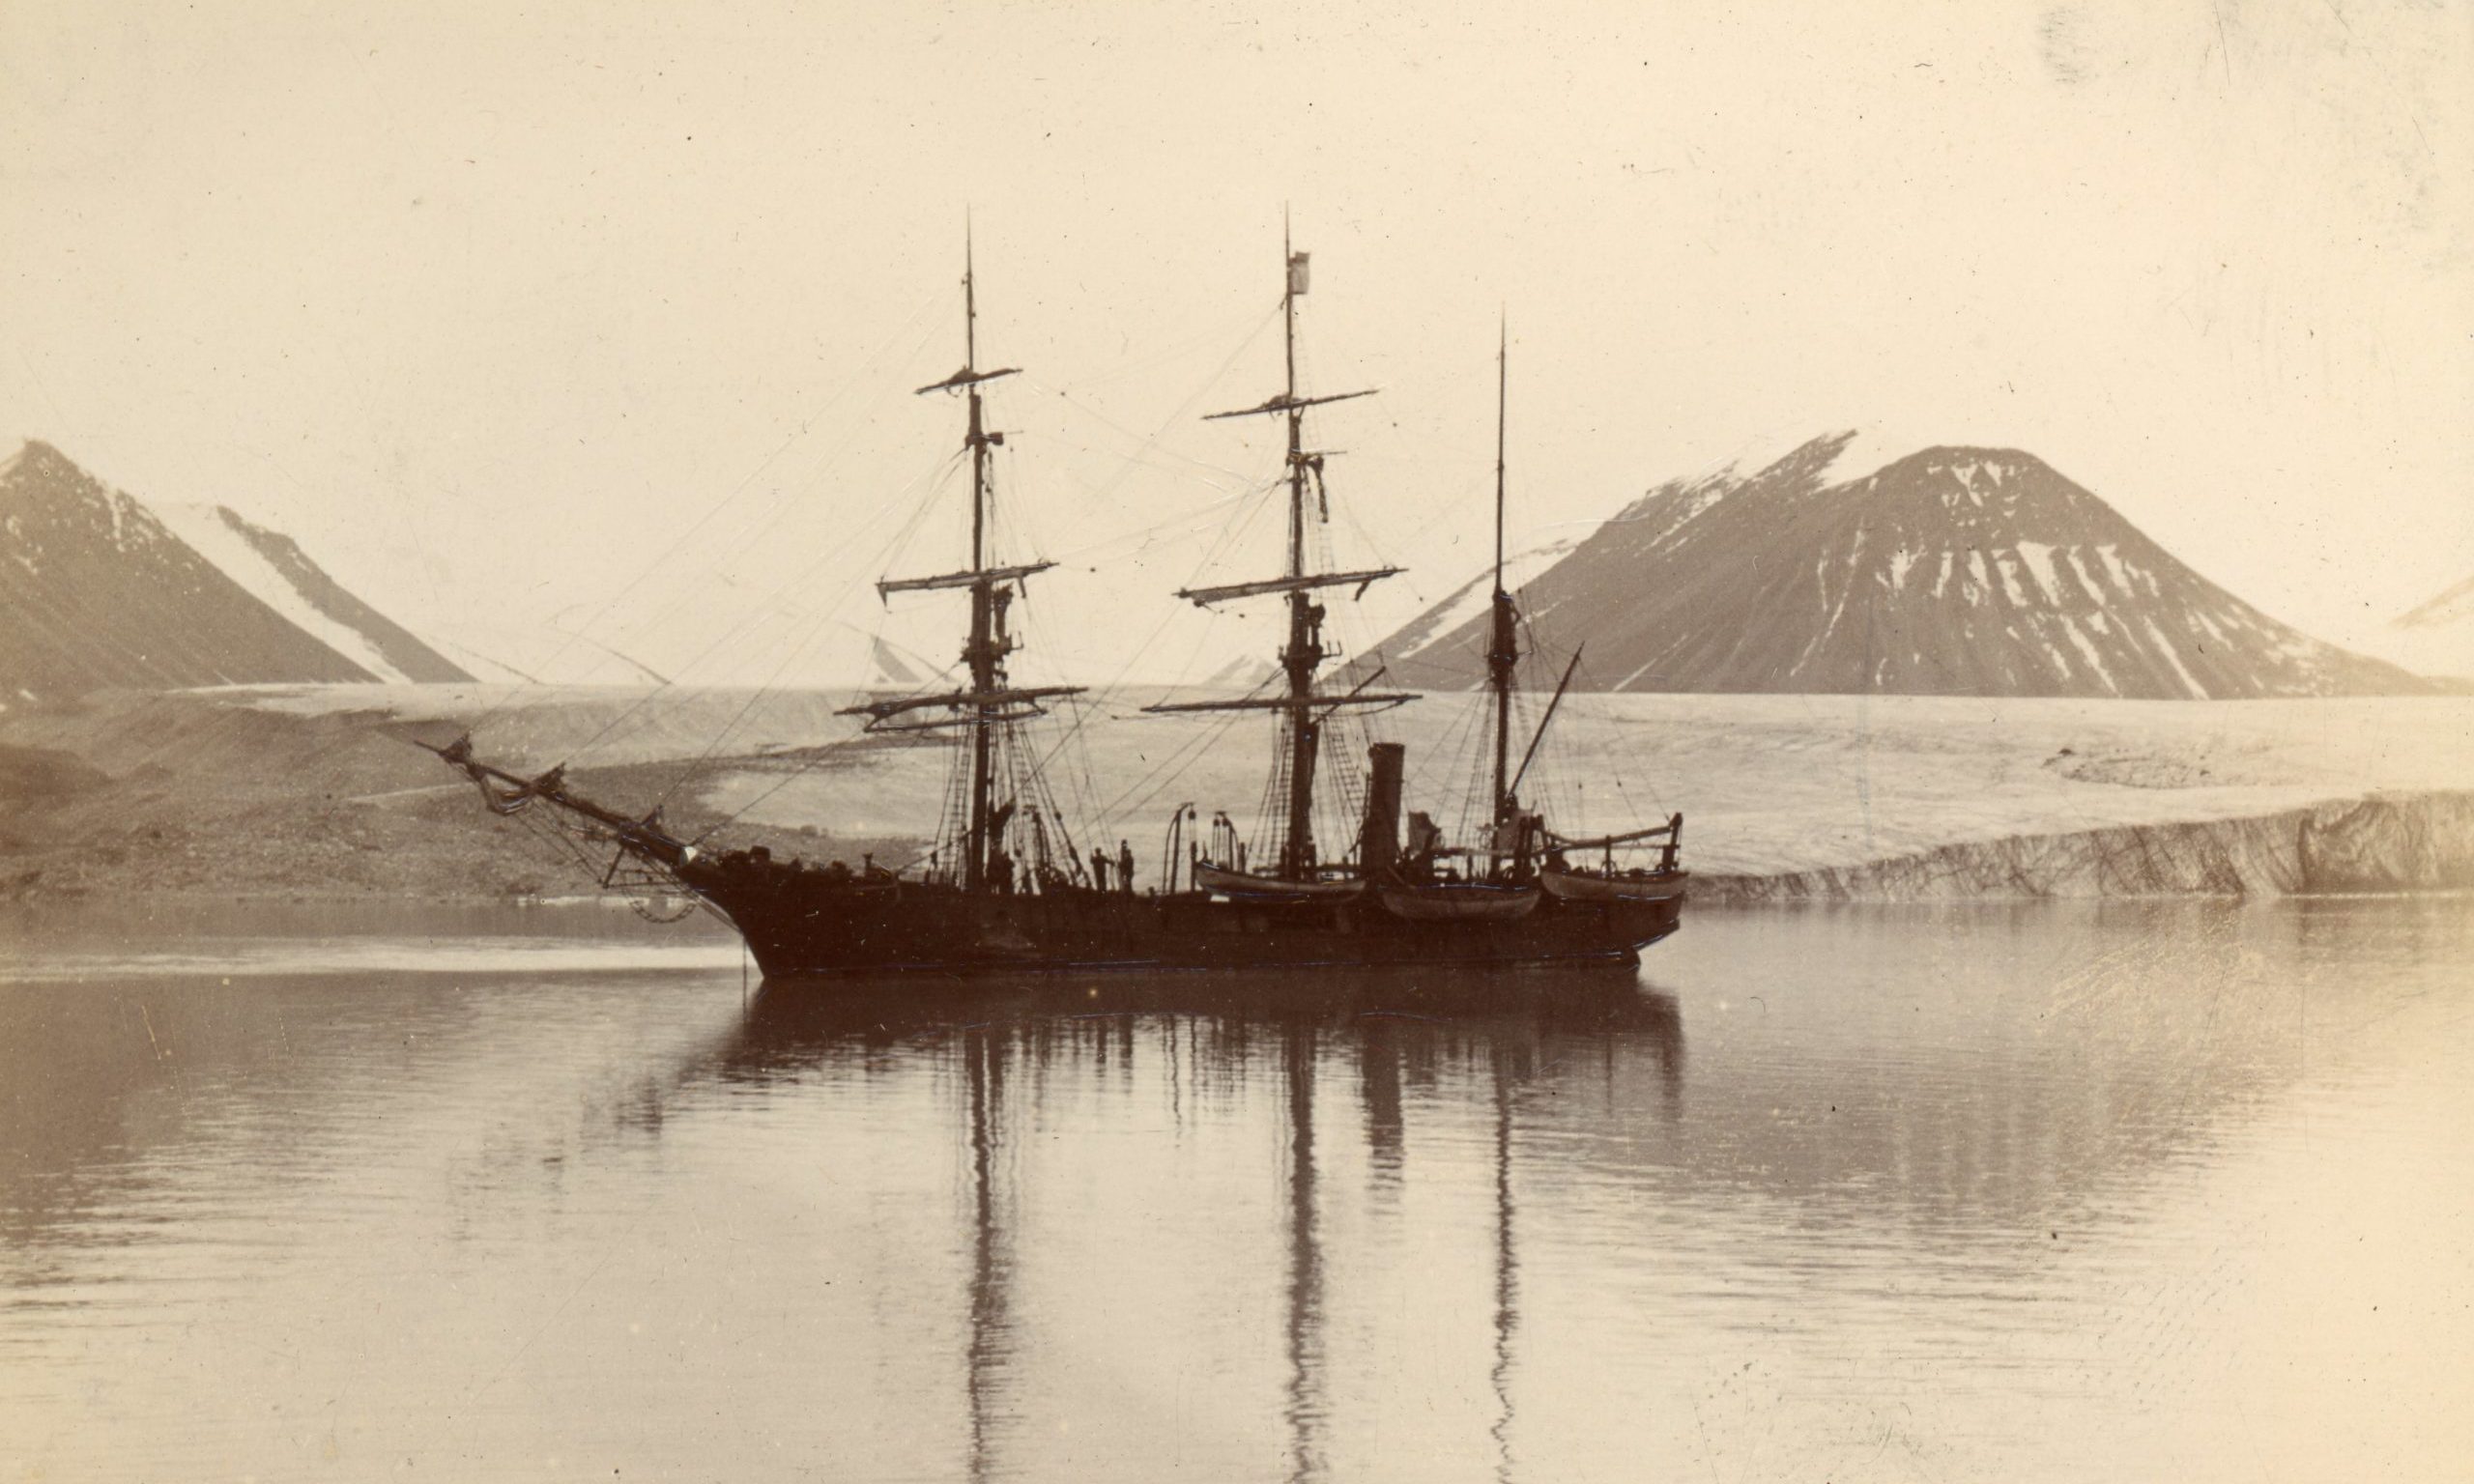 The 140ft barque-rigged steam whaler Nova Zembla took its final voyage in 1902